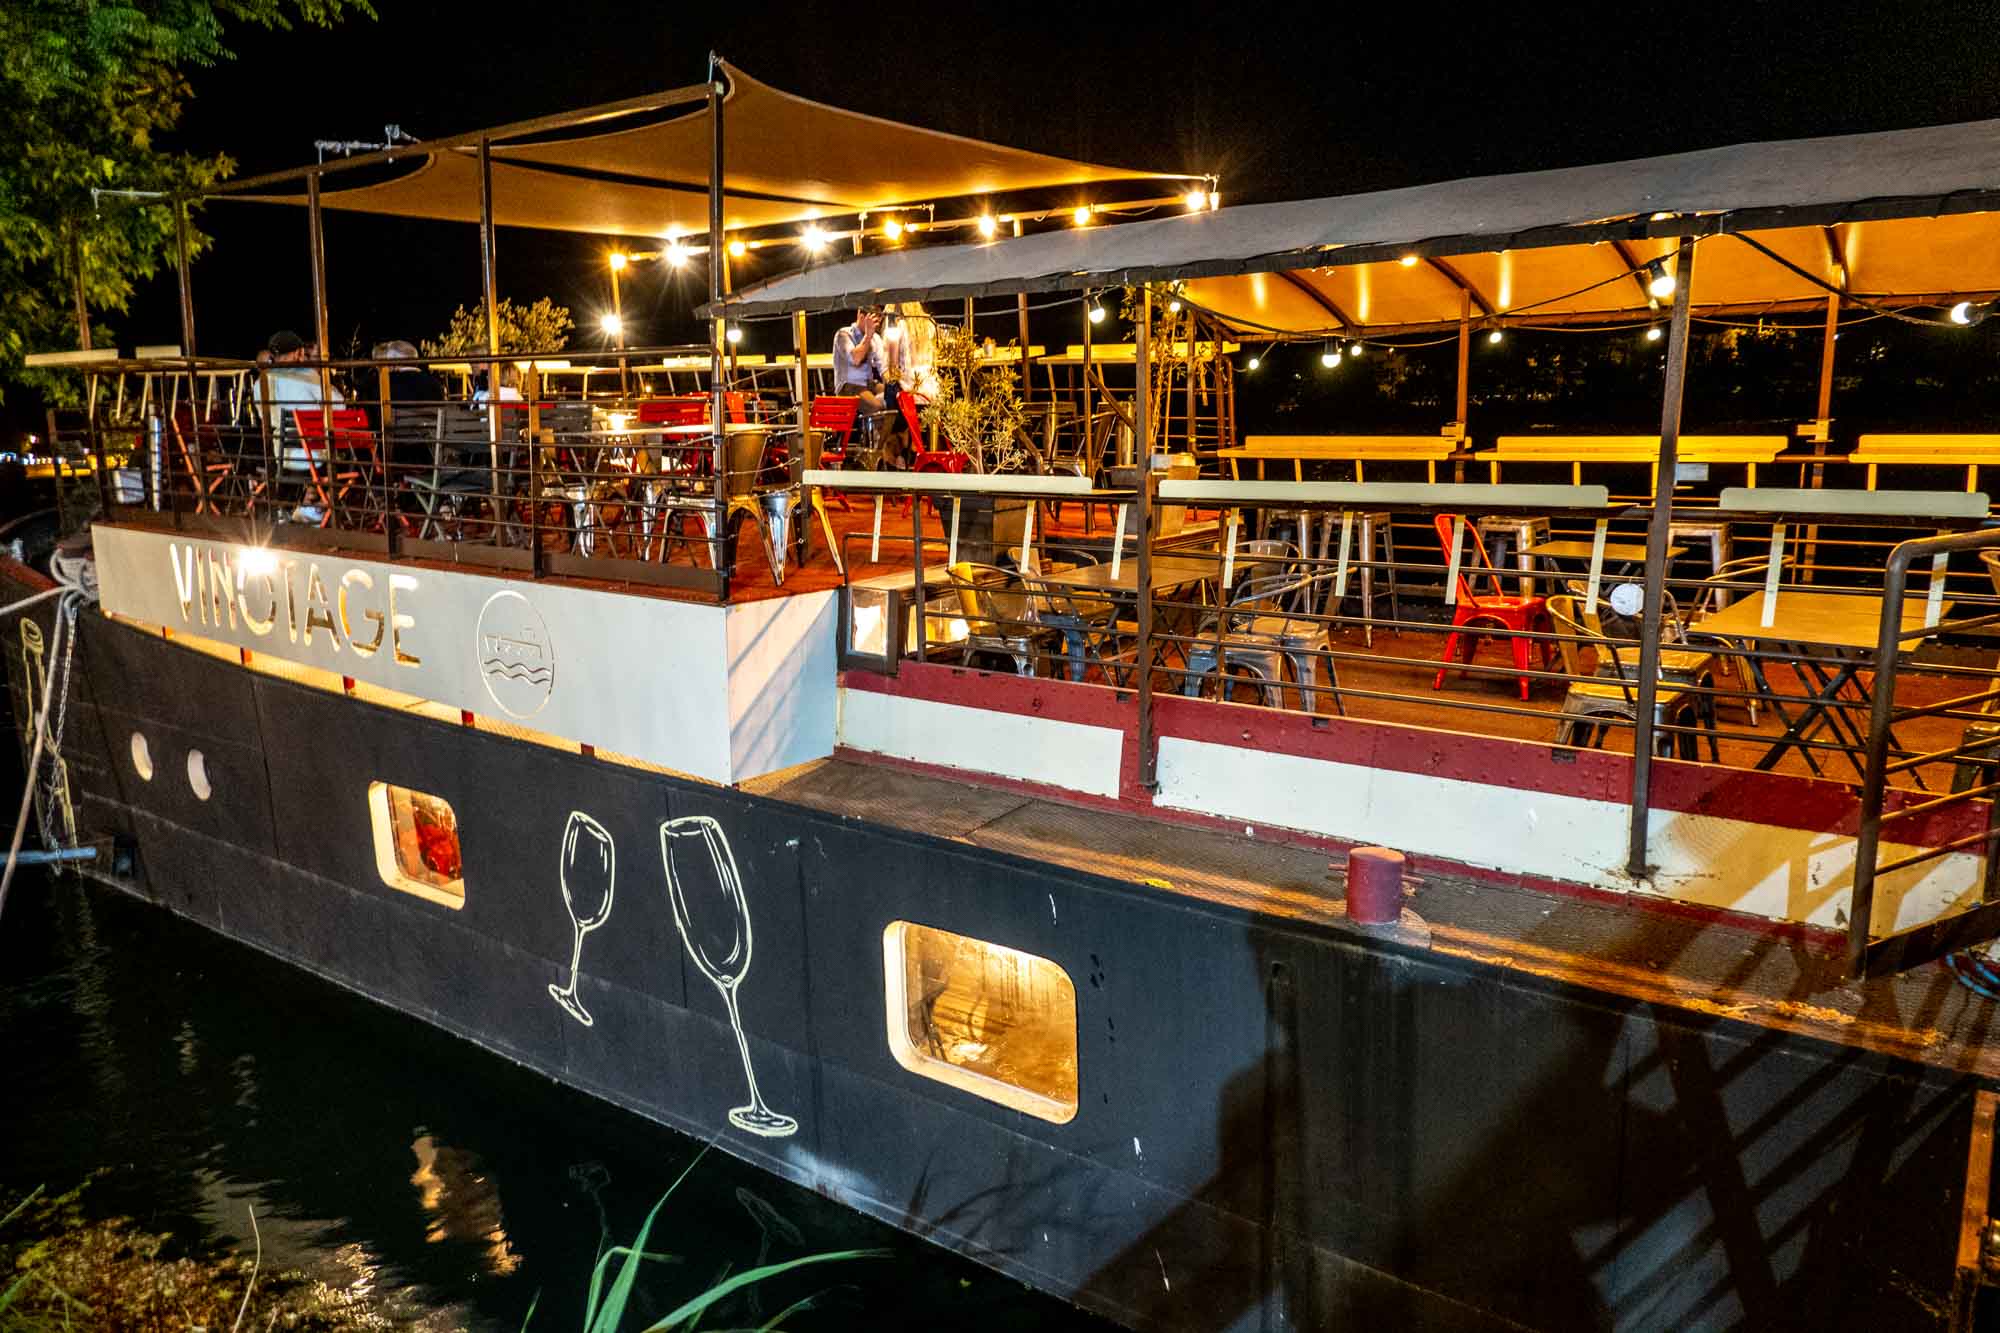 Wine bar on a black barge lit up at night with a sign for "Vinotage"